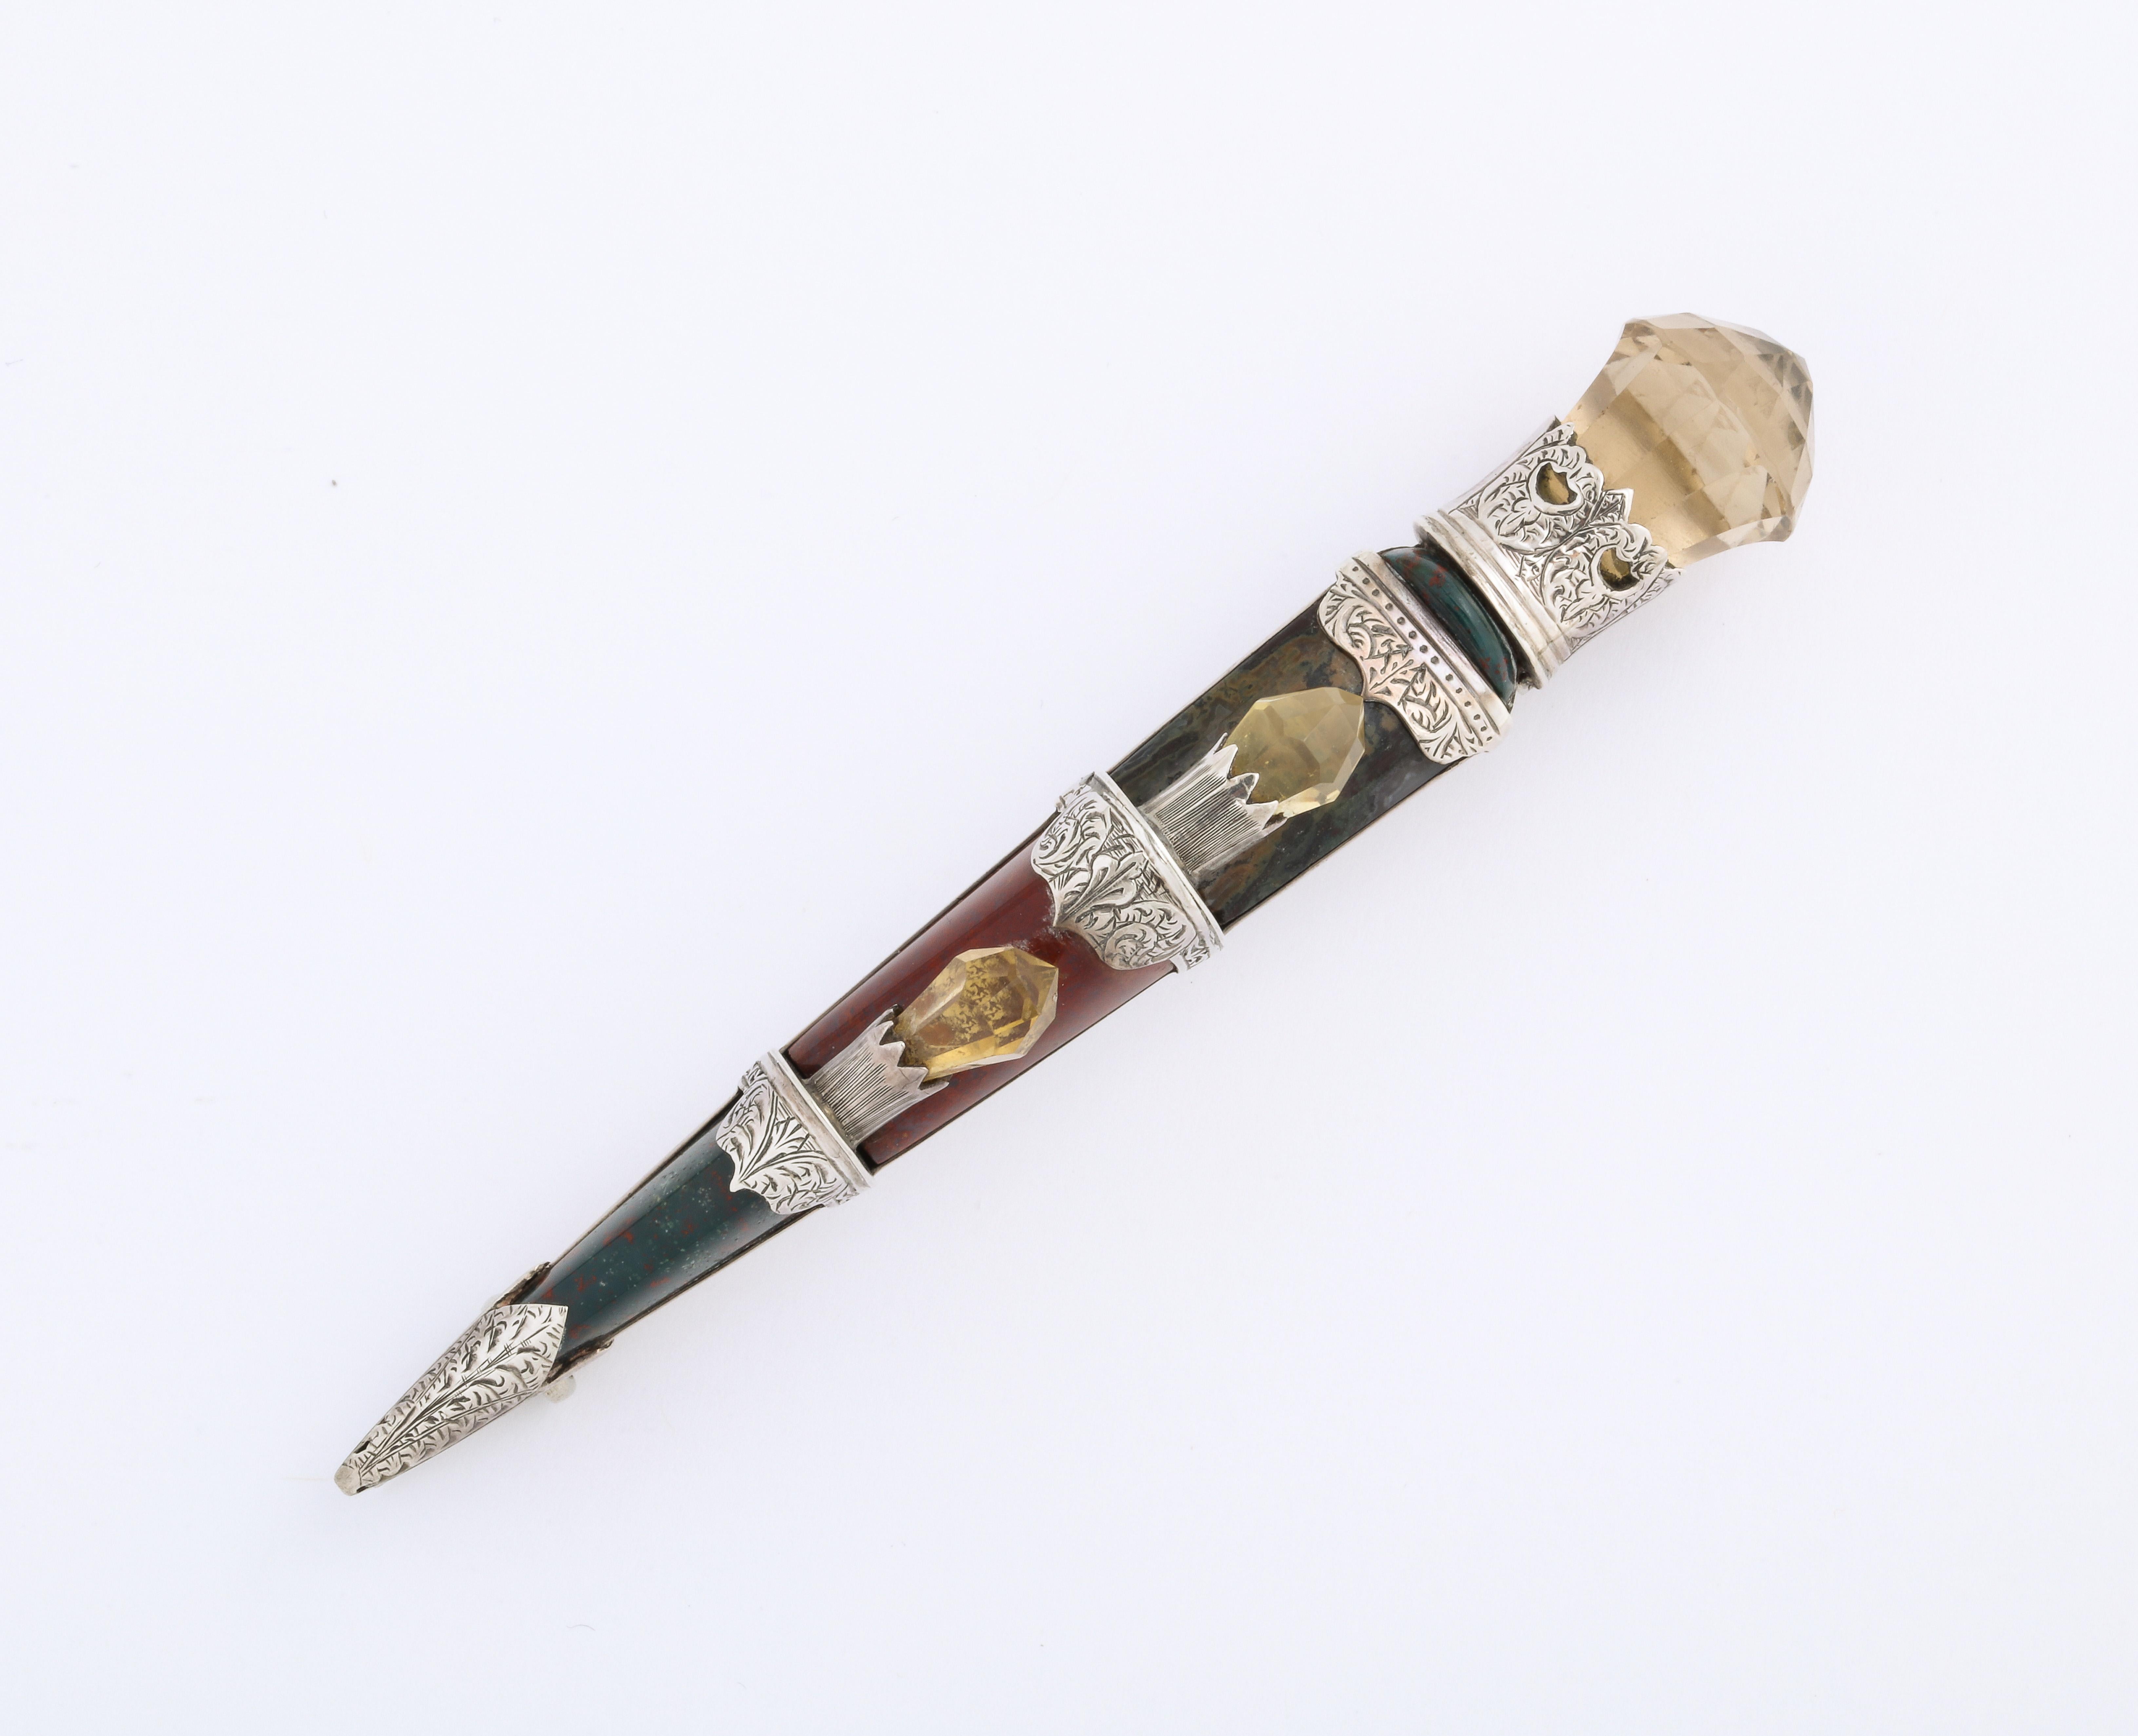 Lovers of Scottish Jewelry unite and cheer this sterling silver large dirk set with moss agate bloodstone and carnelian, topped by a beautiful prism shaped citrine, known in Scotland as a Cairngorm. The dirk is broad and long. Each agate section is